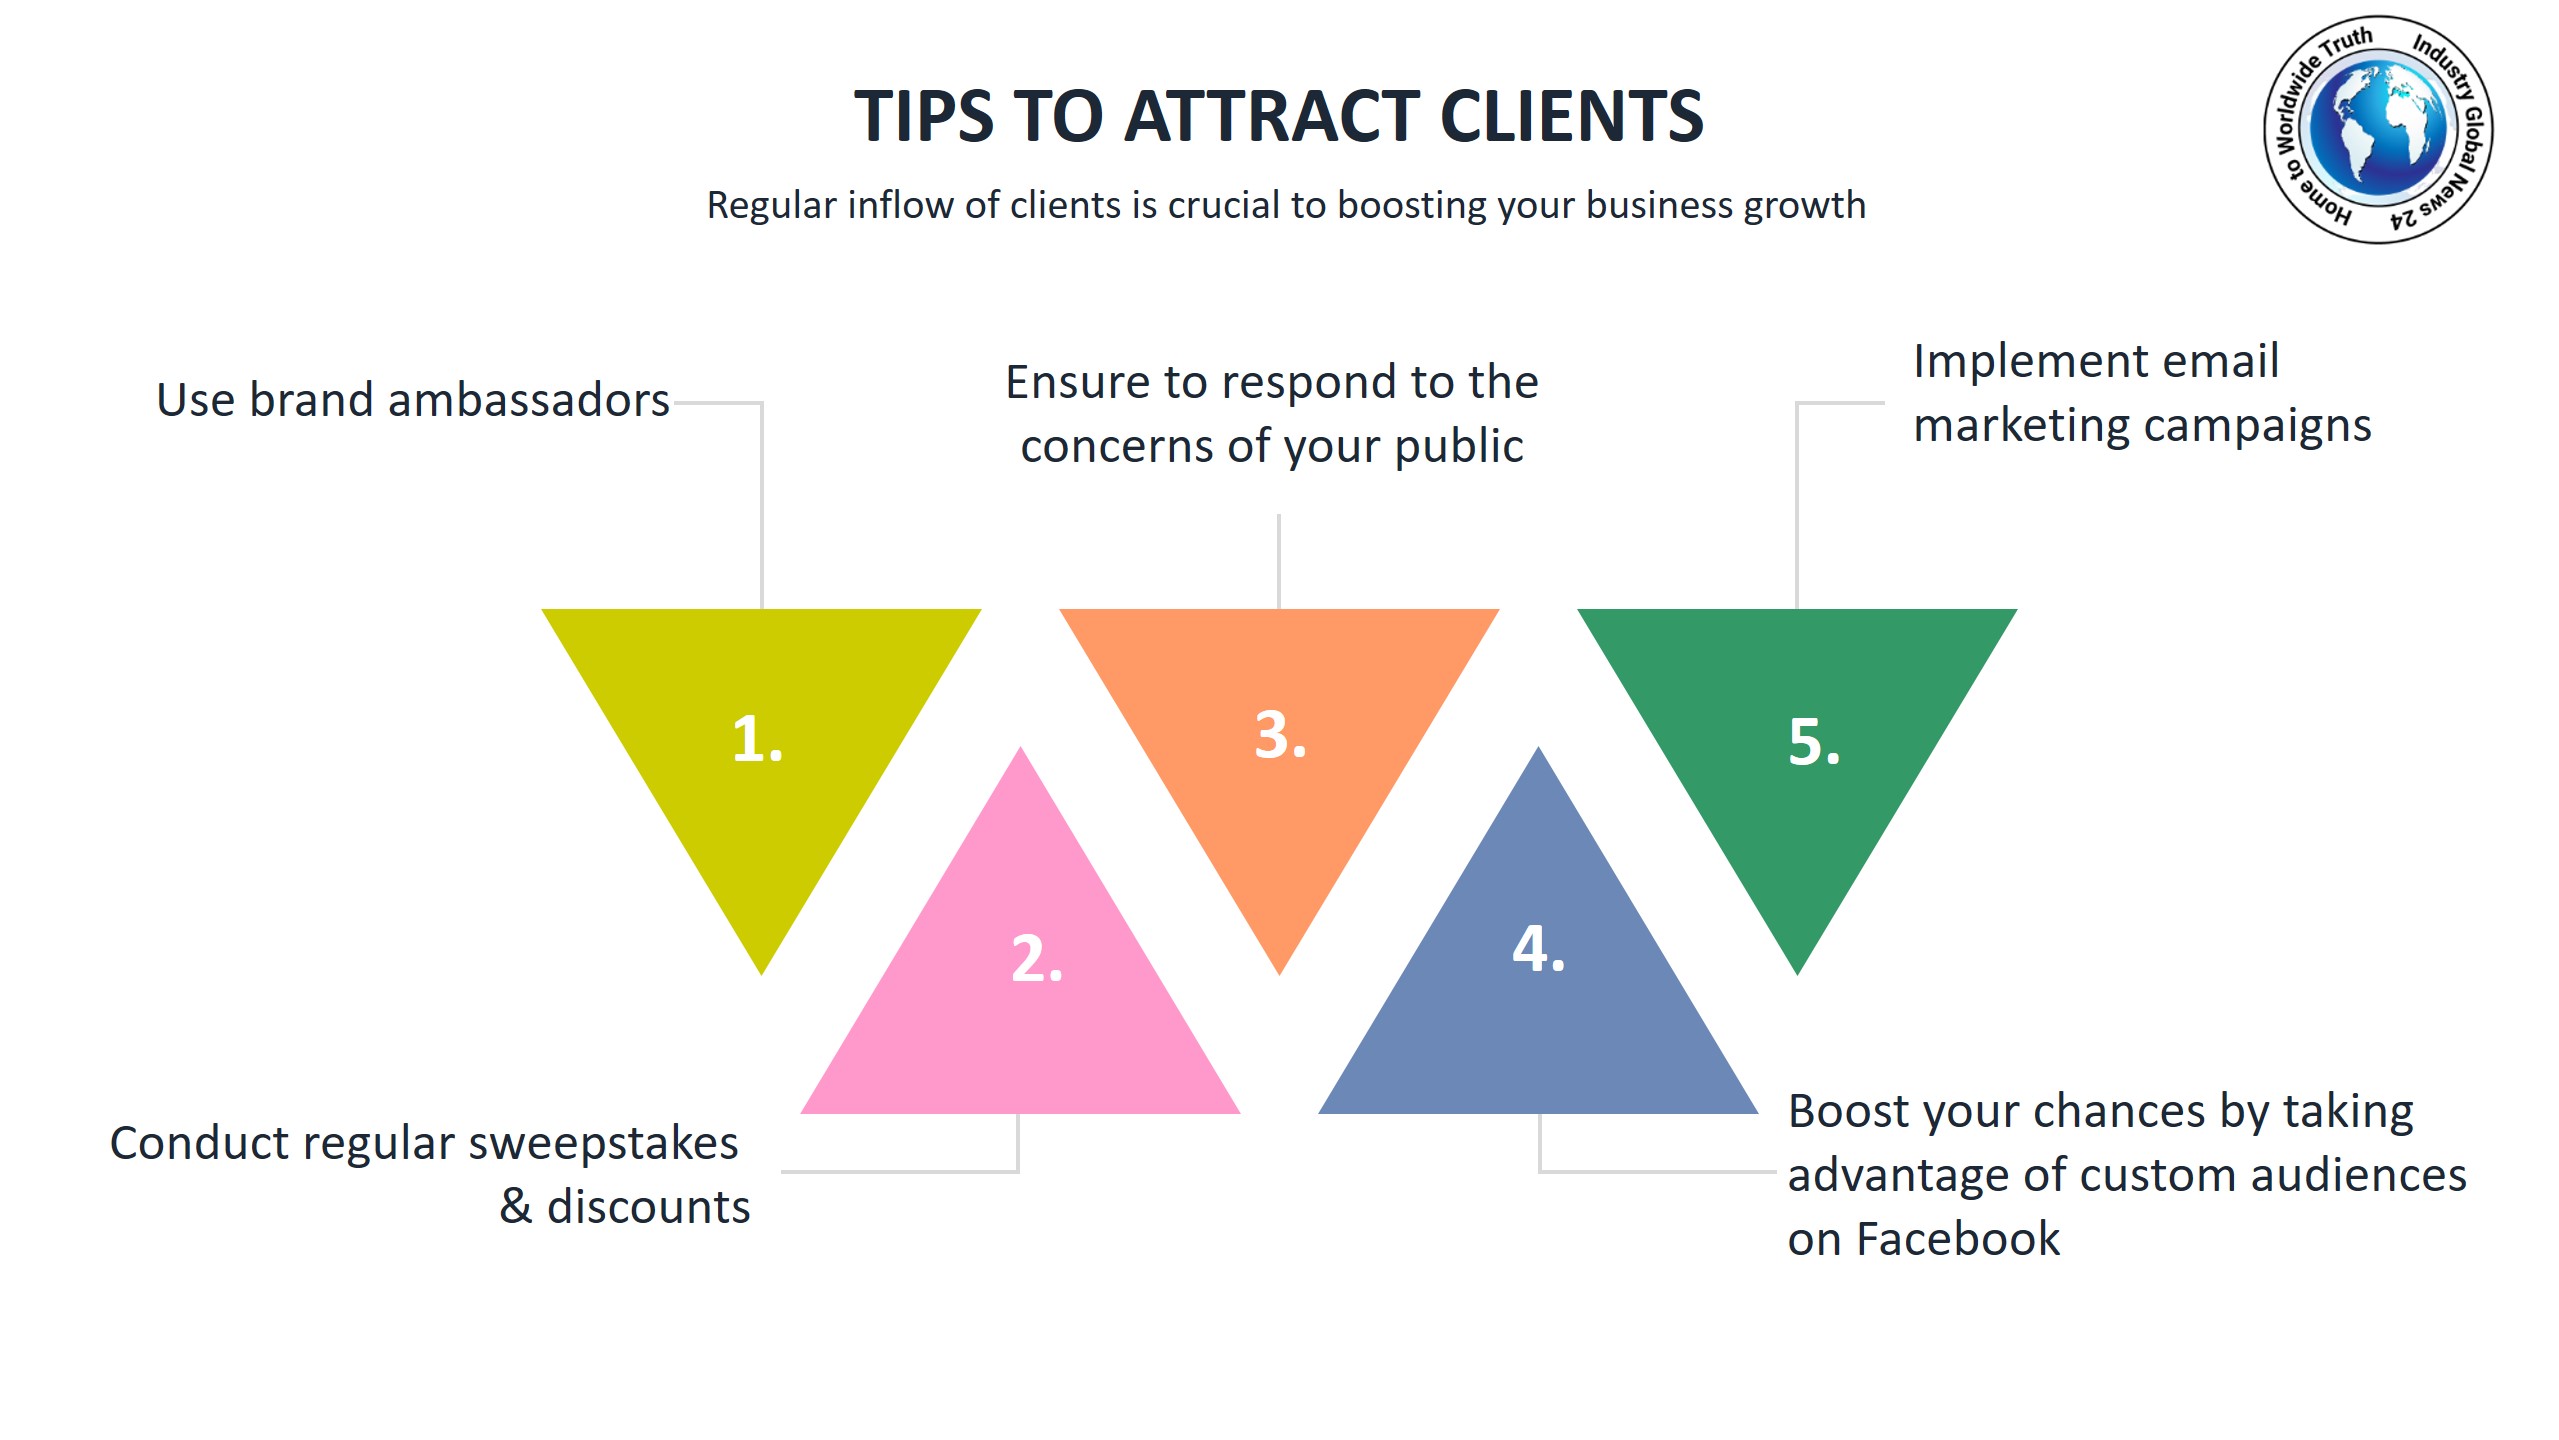 Tips to attract clients